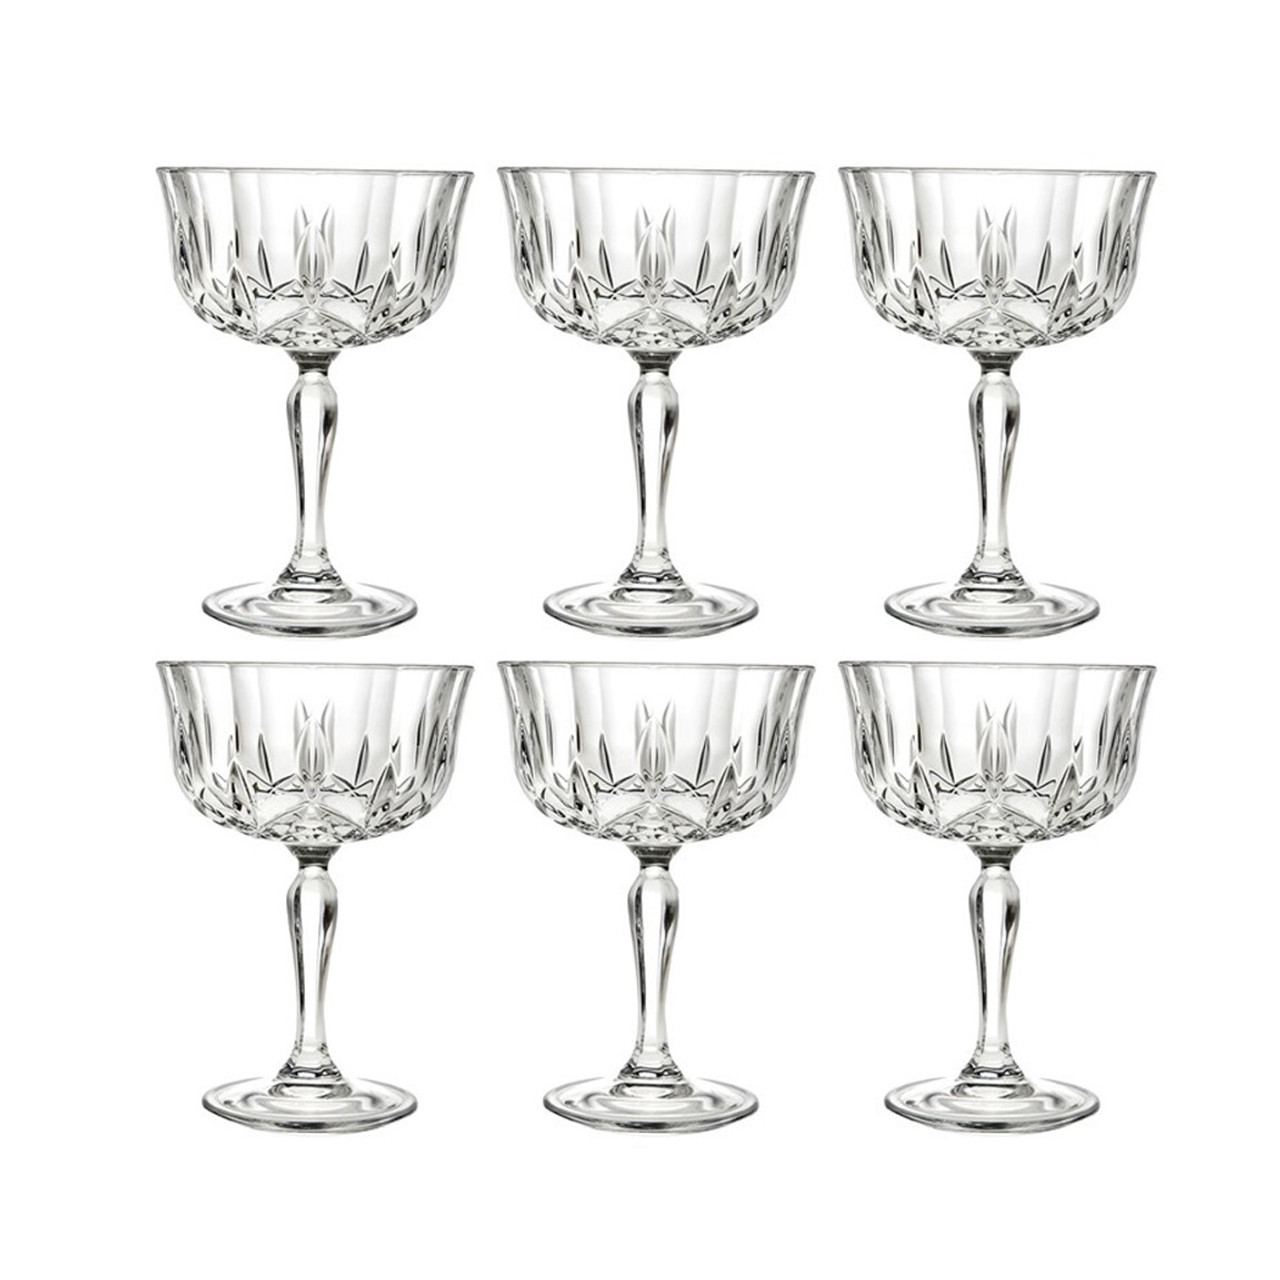 https://cdn11.bigcommerce.com/s-9mnzpxwffi/images/stencil/1280x1280/products/598/3313/0-set_of_6_coupe_champagne_glasses__09407.1701651779.jpg?c=2